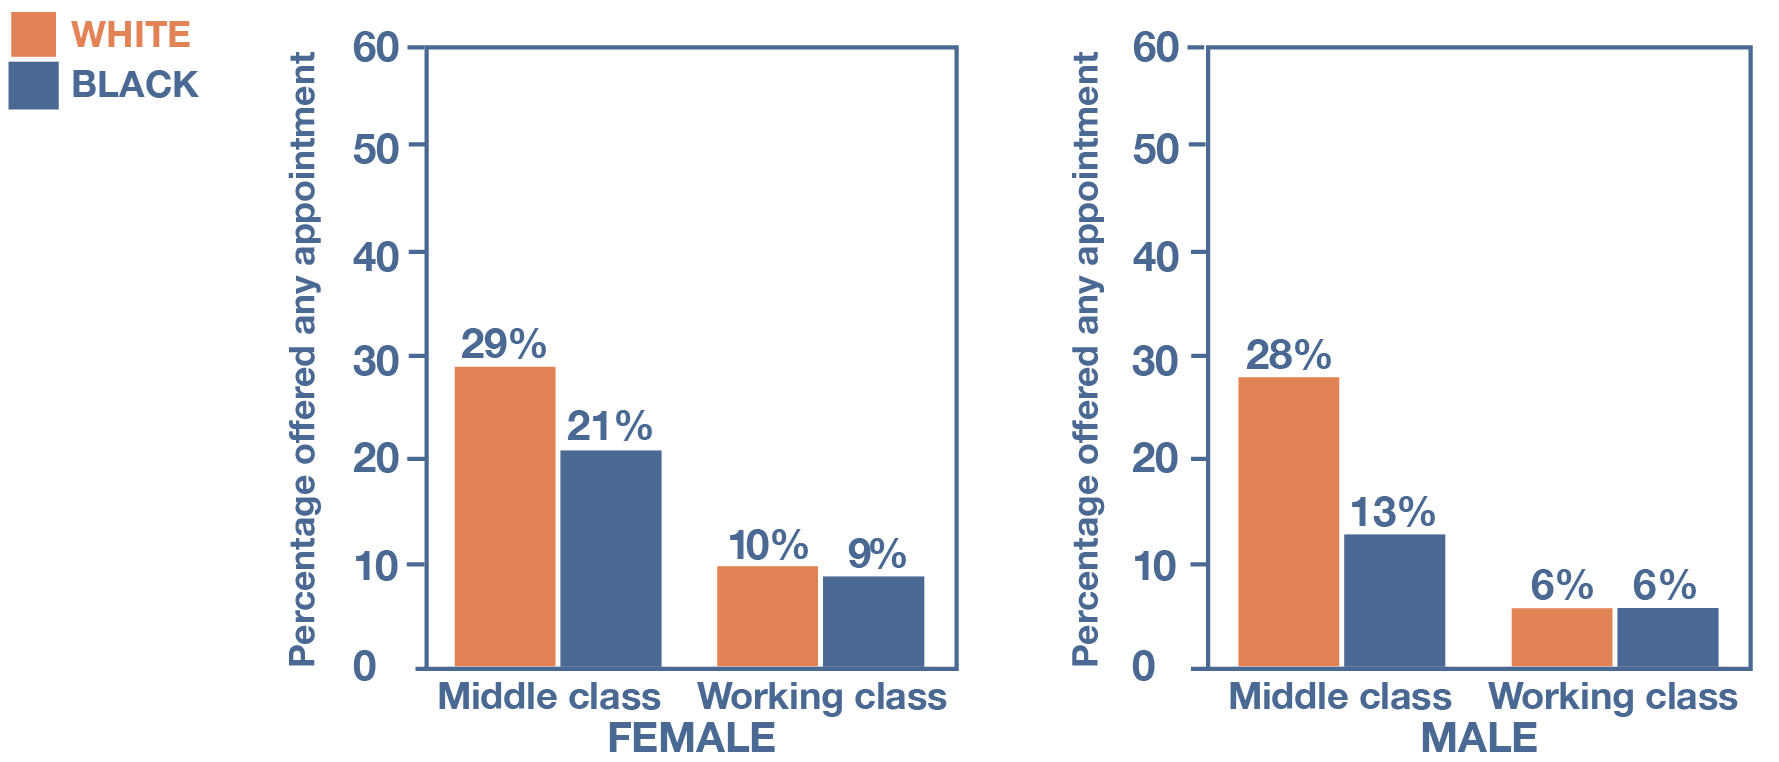 Two charts, one for female help-seekers and another for male help-seekers, both of which show that white middle-class help-seekers fare much better in getting appointments than their black middle-class counterparts, and middle-class help-seekers of either race do much better than working-class help-seekers.